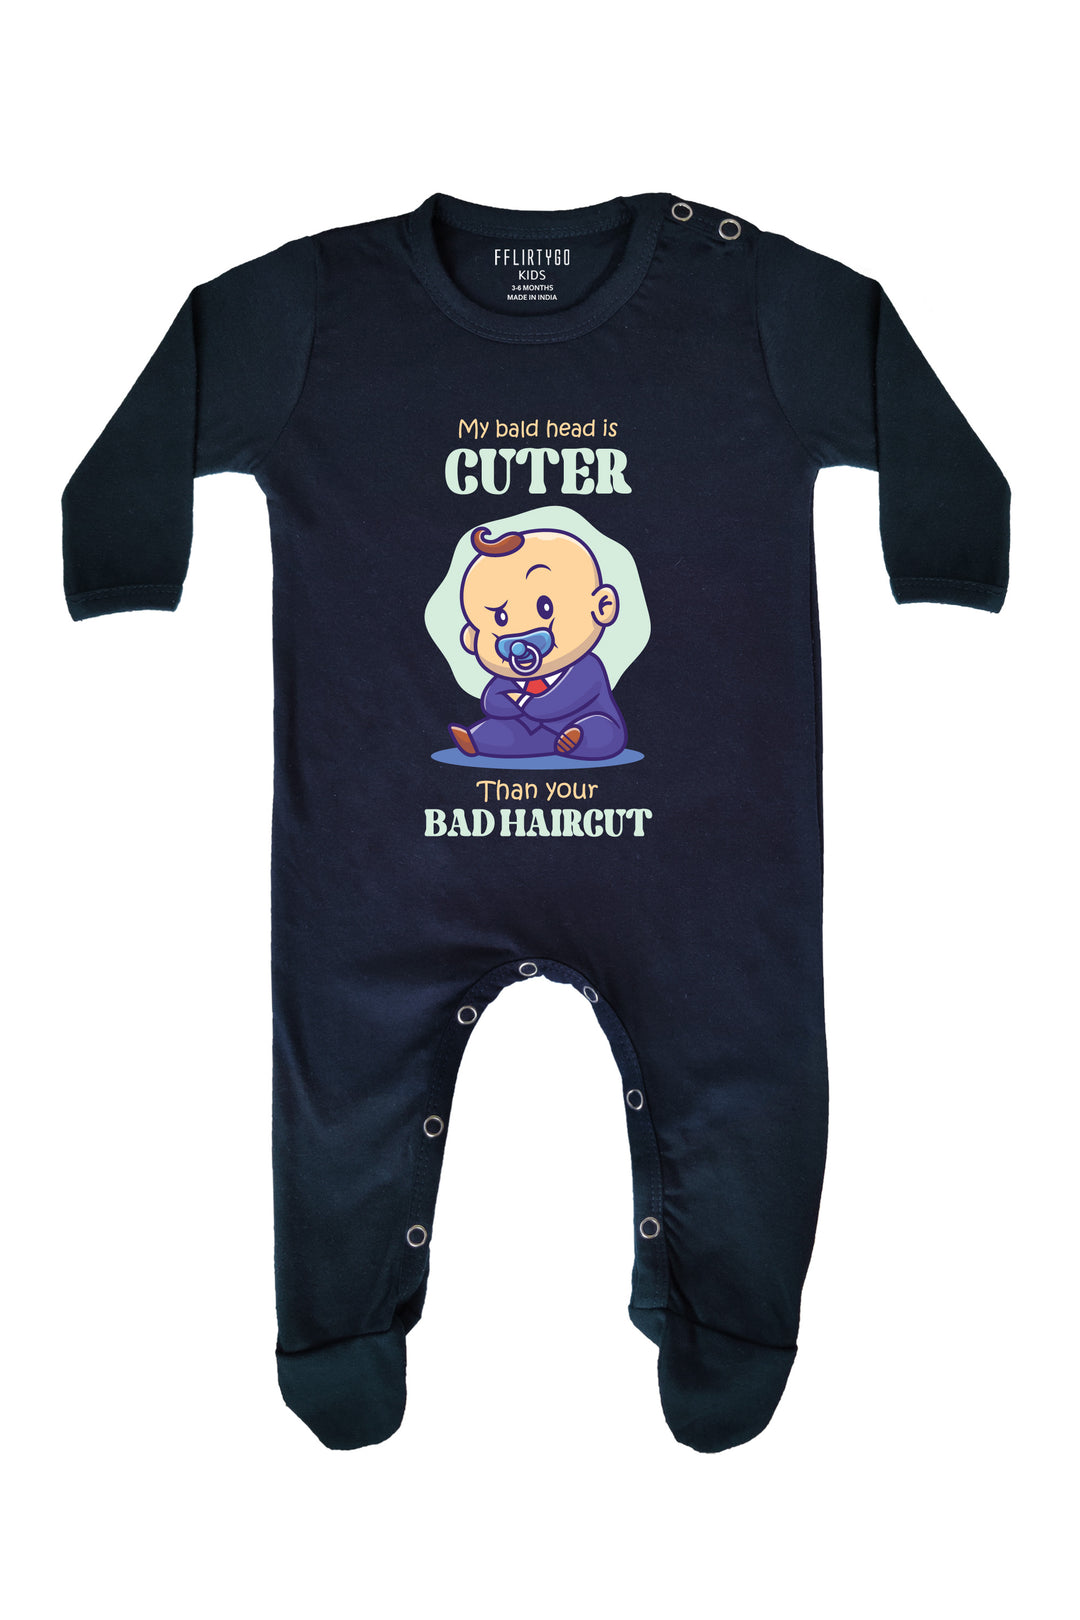 My Bald Head is Cuter Than Your Bad Haircut Baby Romper | Onesies